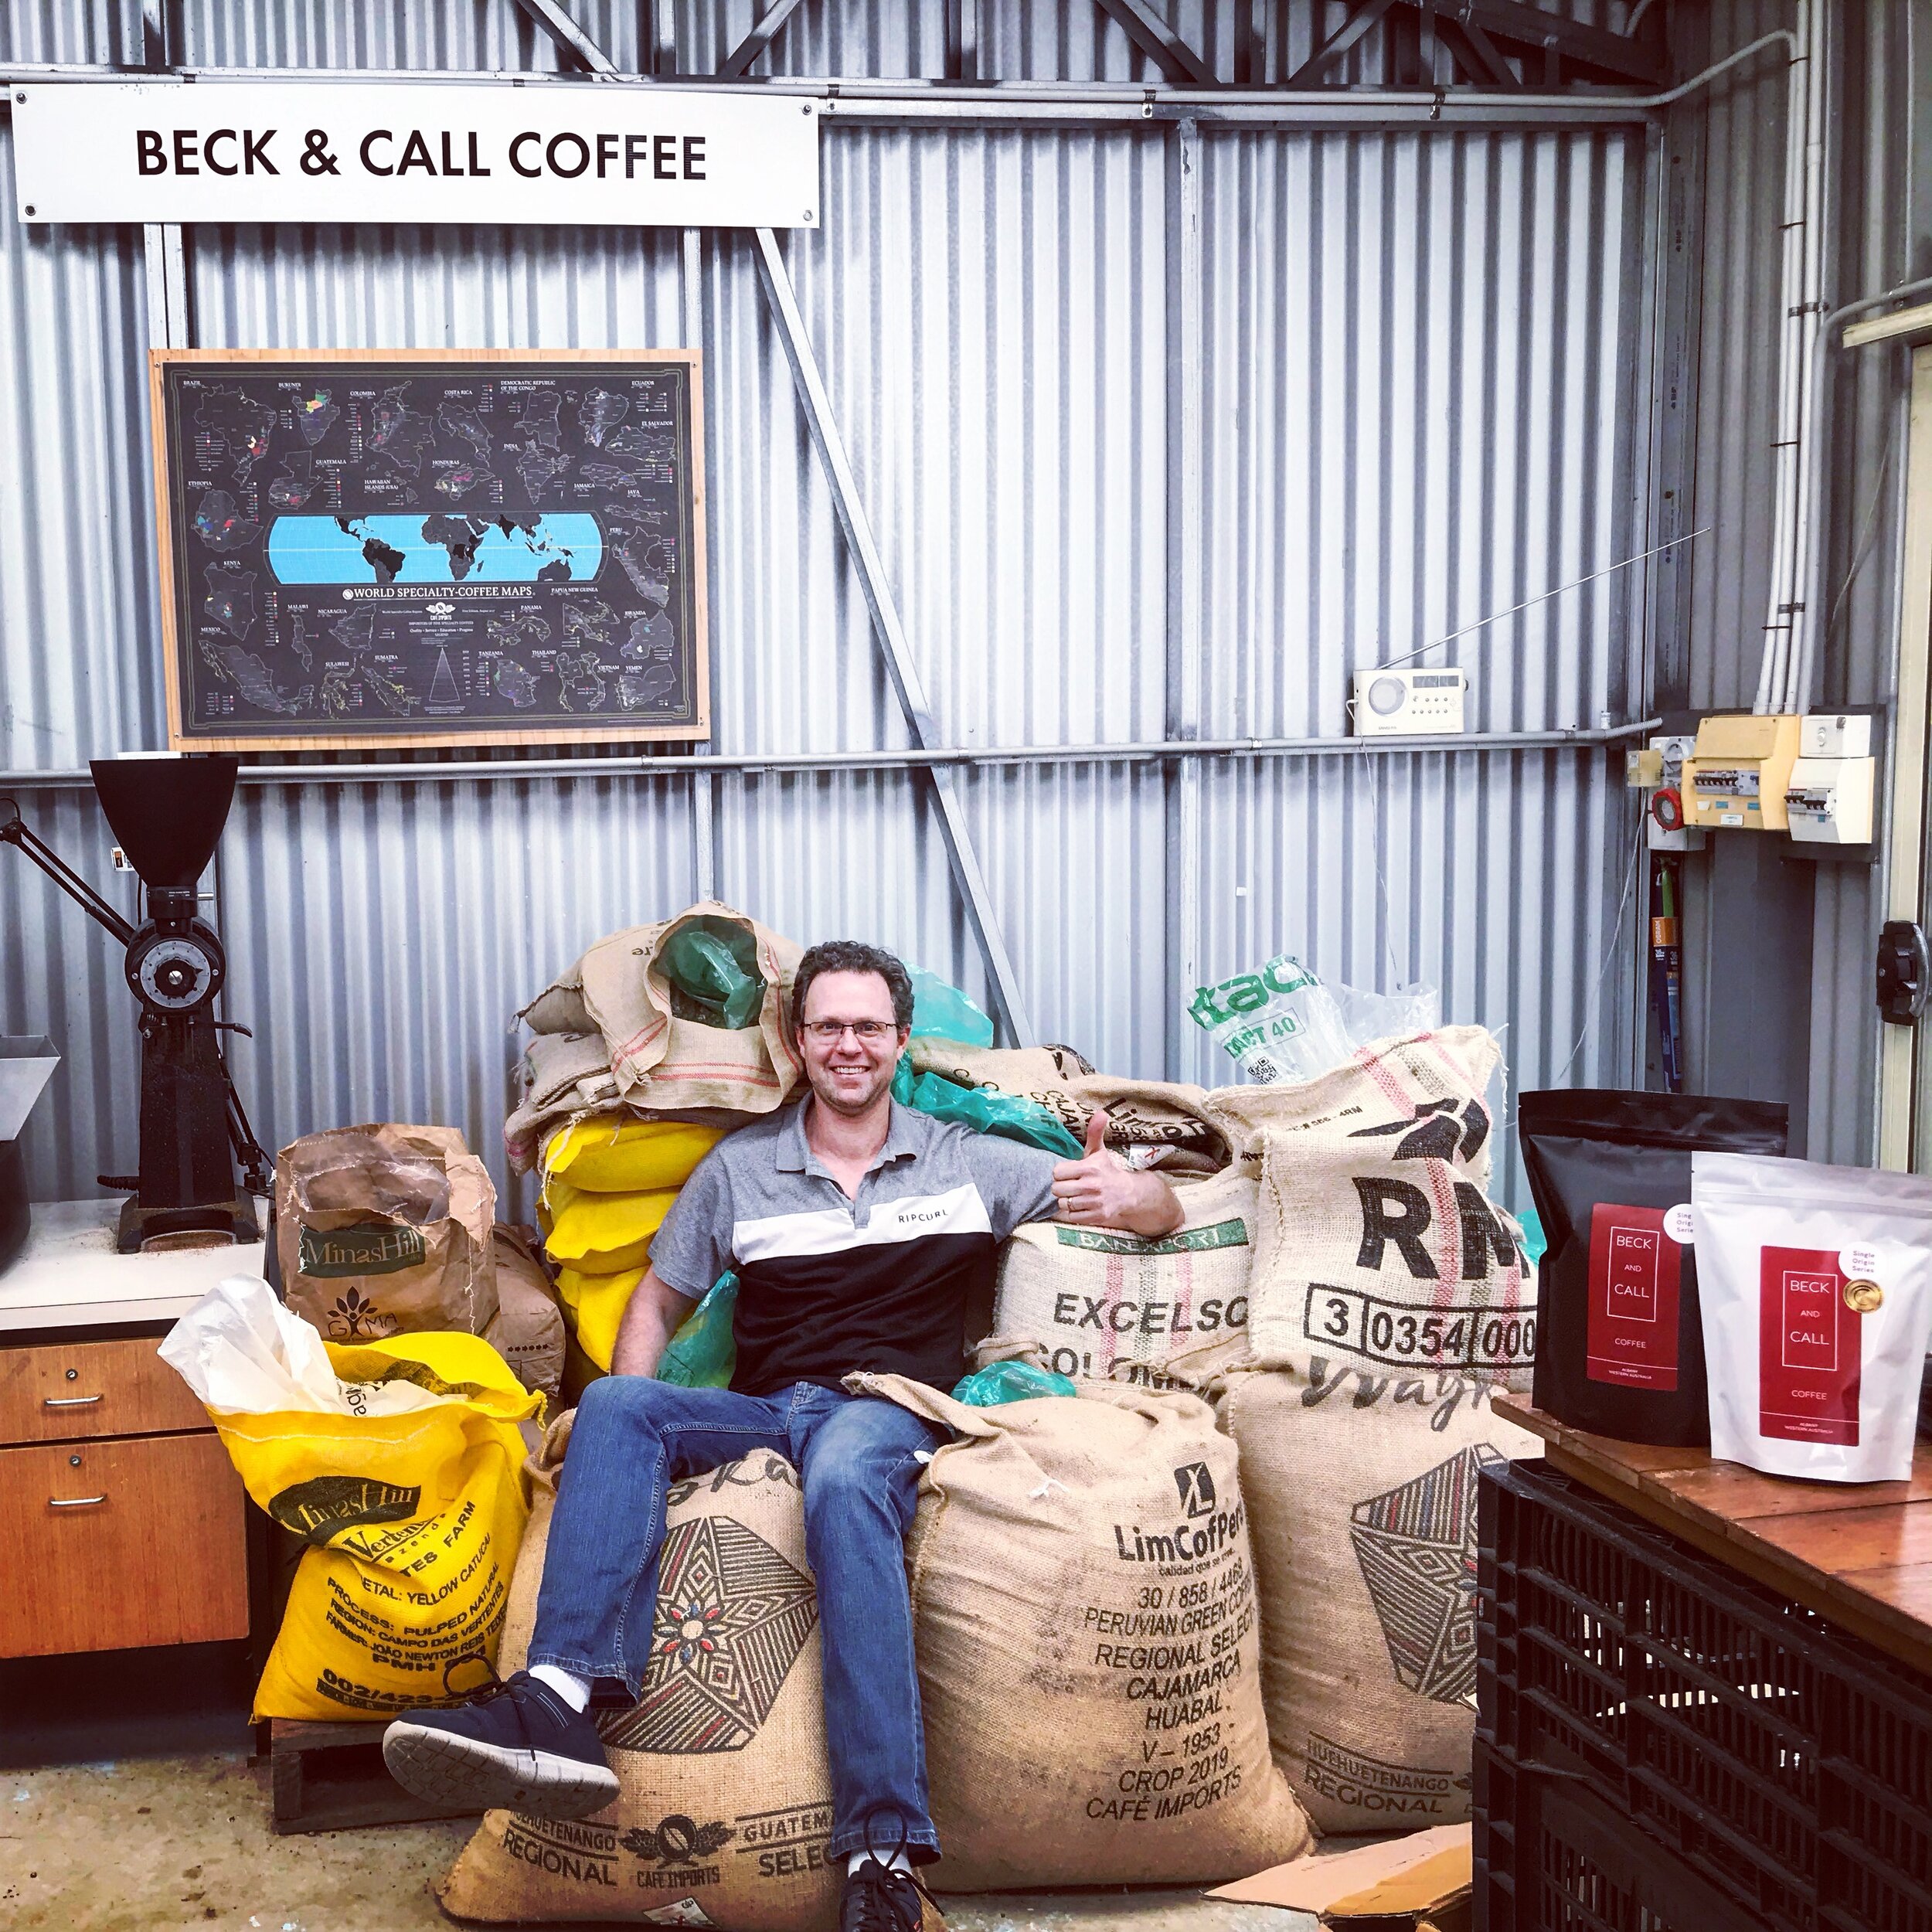 Kade kicking back on his beanbag after a long weeks work roasting coffee for coffee snobs all over the country!